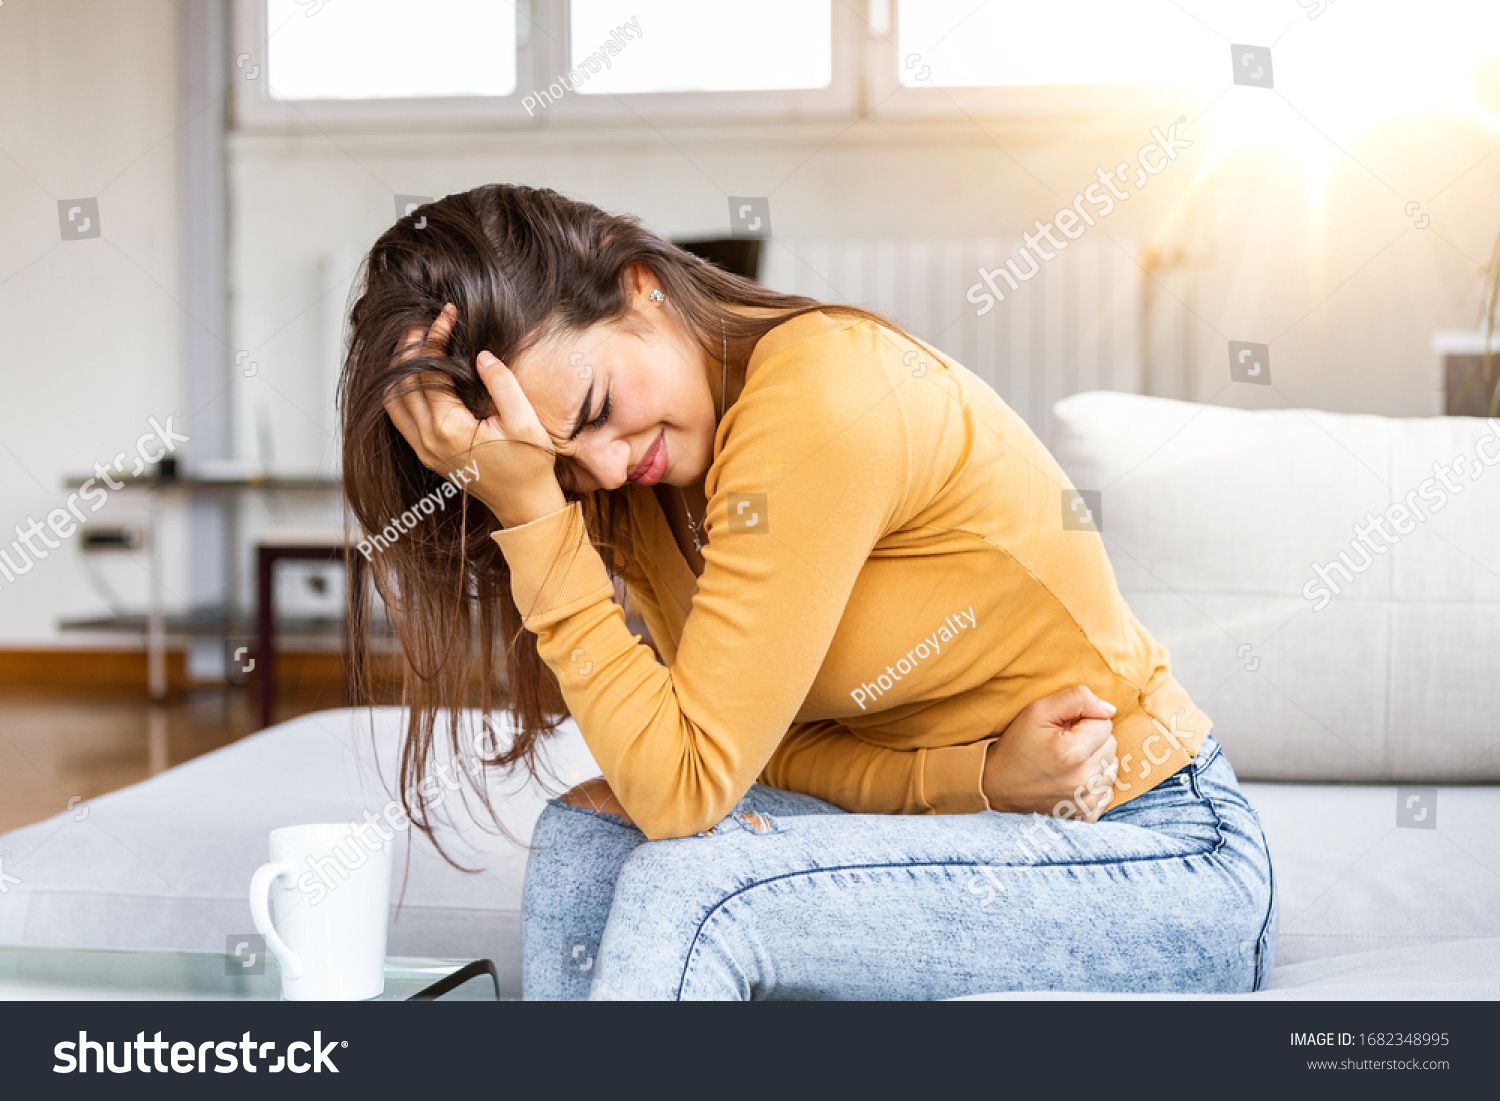 Young sick woman with hands holding pressing her crotch lower abdomen. Medical or gynecological problems, healthcare concept. Young woman suffering from abdominal pain while sitting on sofa at home #1682348995